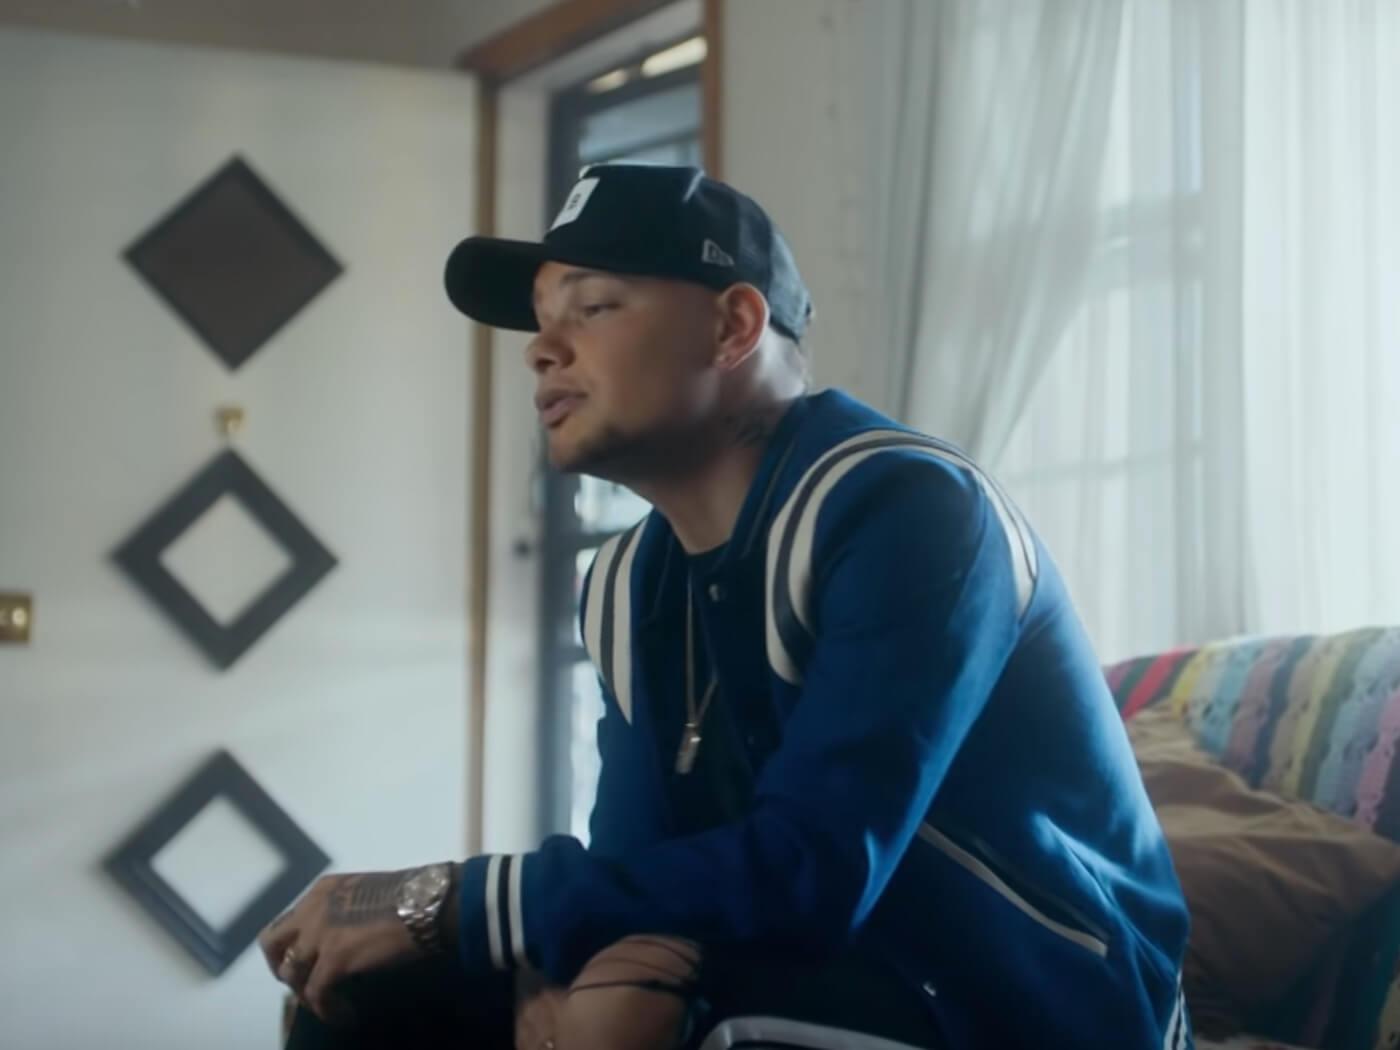 Kane Brown chronicles his upbringing in “Good as You” MV